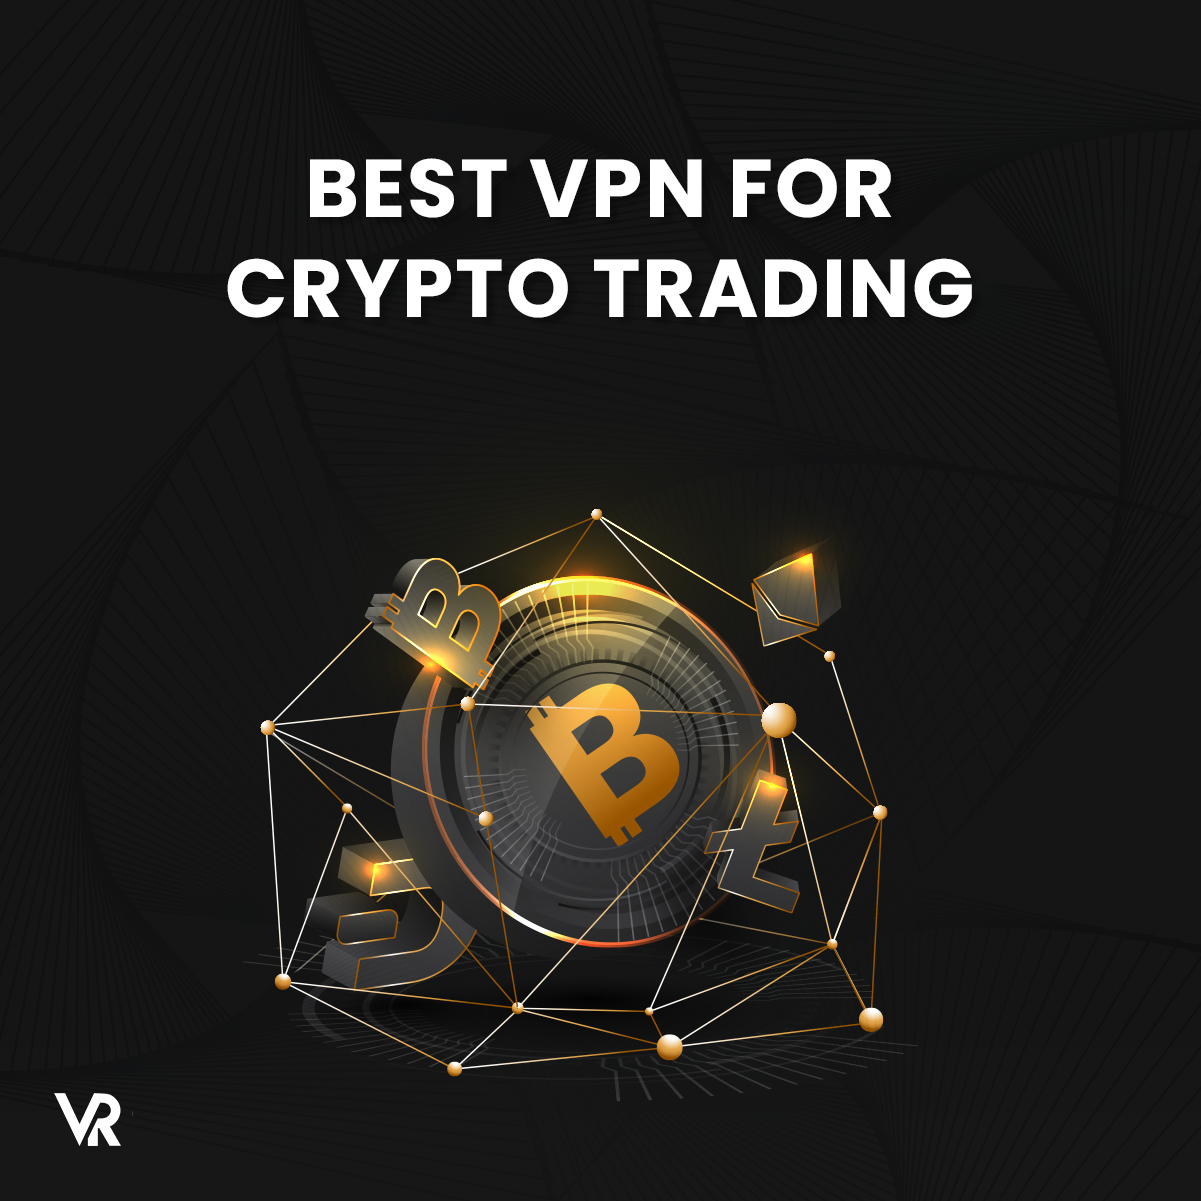 Best VPN for Crypto Trading FeaturedImage